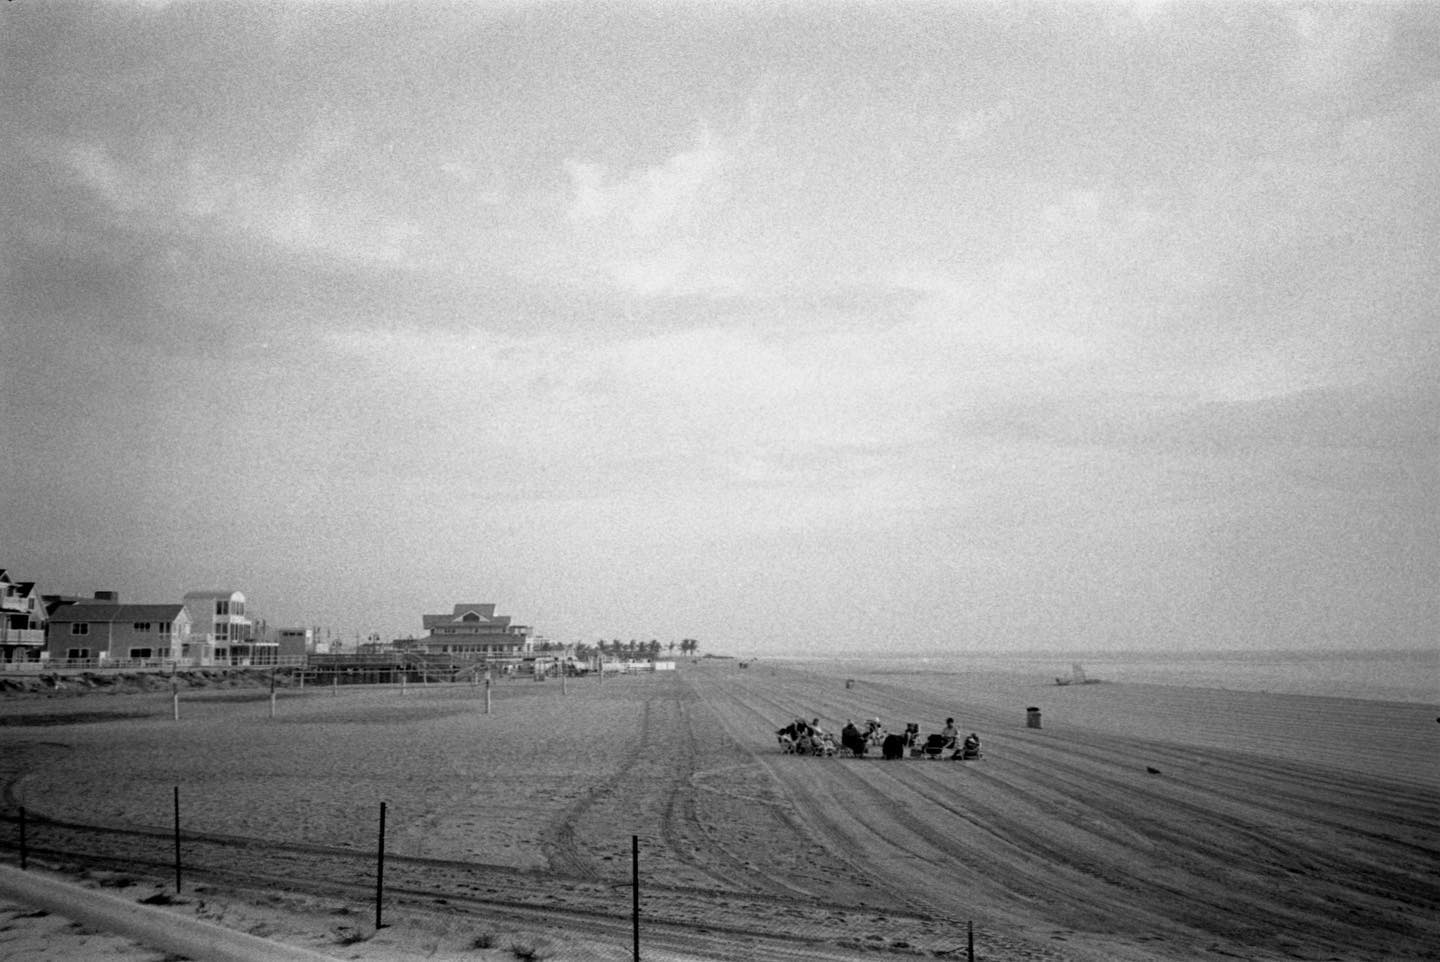 Early morning meeting 
Probably some religious group or something sitting on the beach in a circle of chairs at 7:30 in the morning. Shot with my #olympusxa on @Kodak #superxx and developed in #rodinal in my @arsimago #labbox. #film #filmphotography #filmphotographic #staybrokeshootfilm